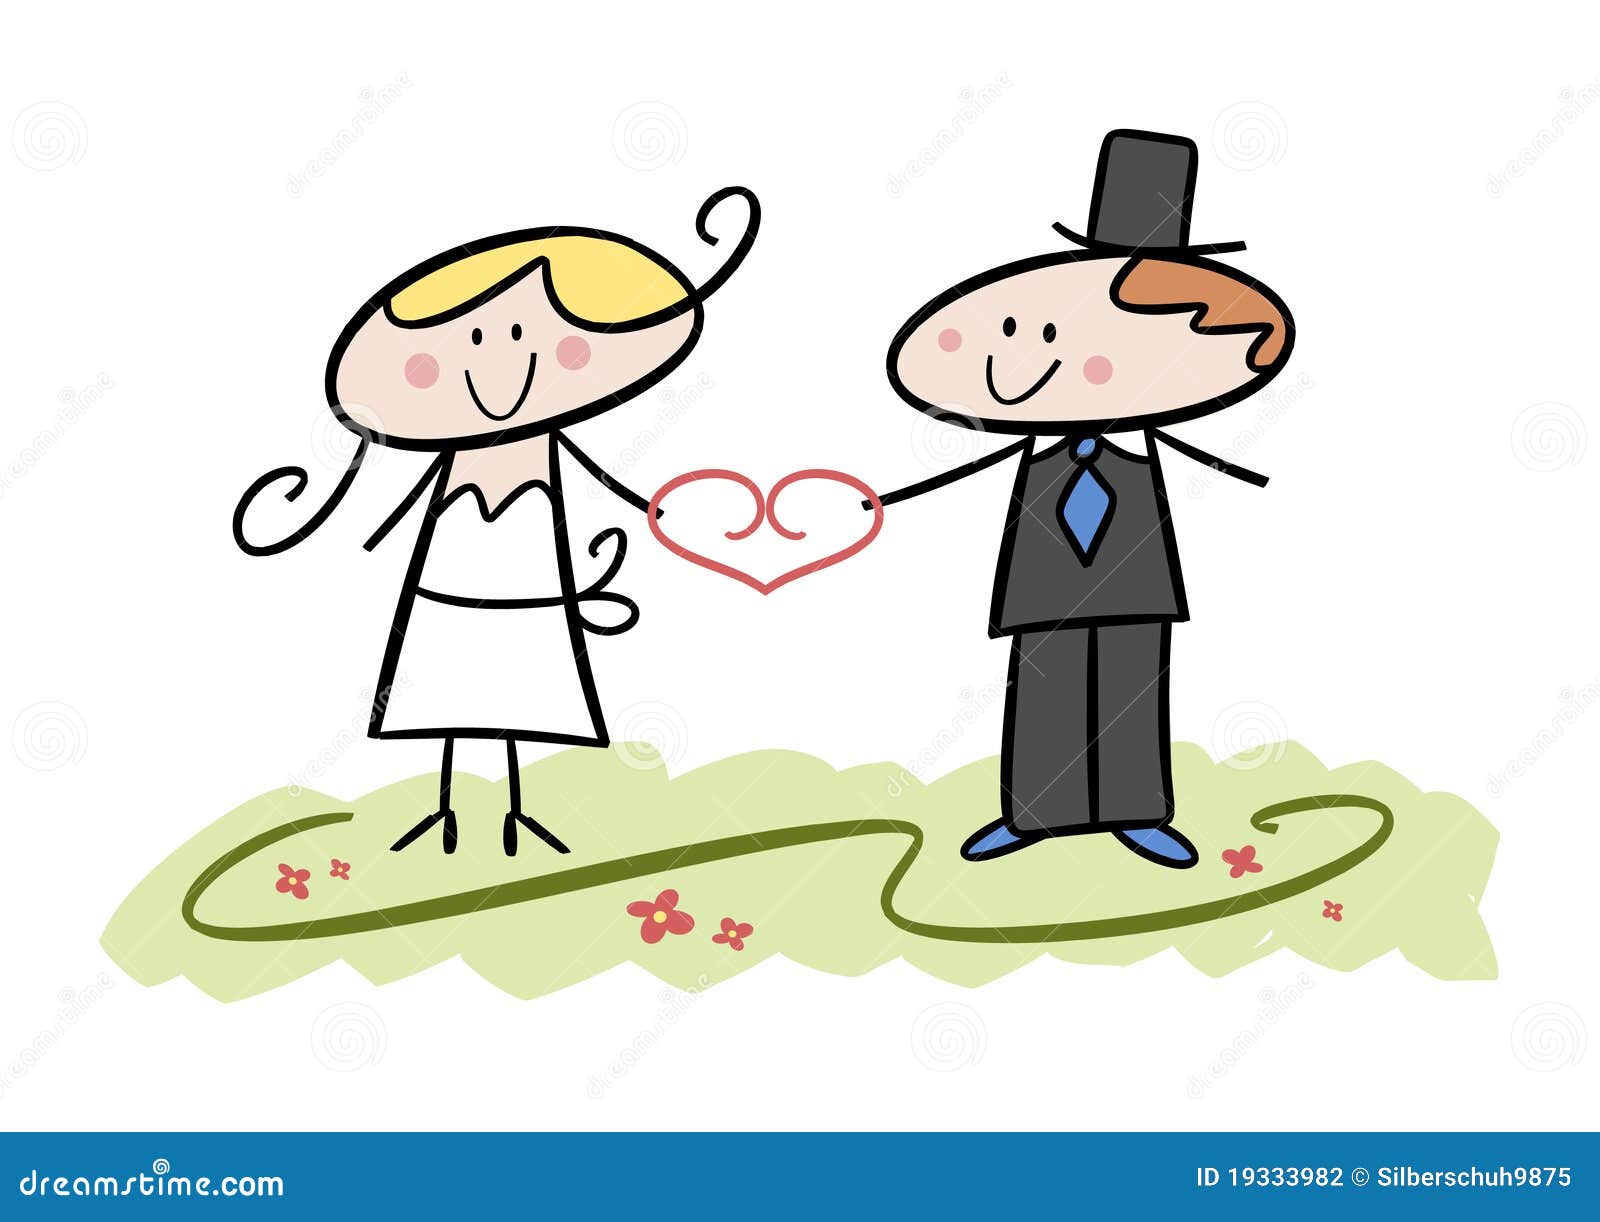 funny wedding clipart bride and groom - photo #24